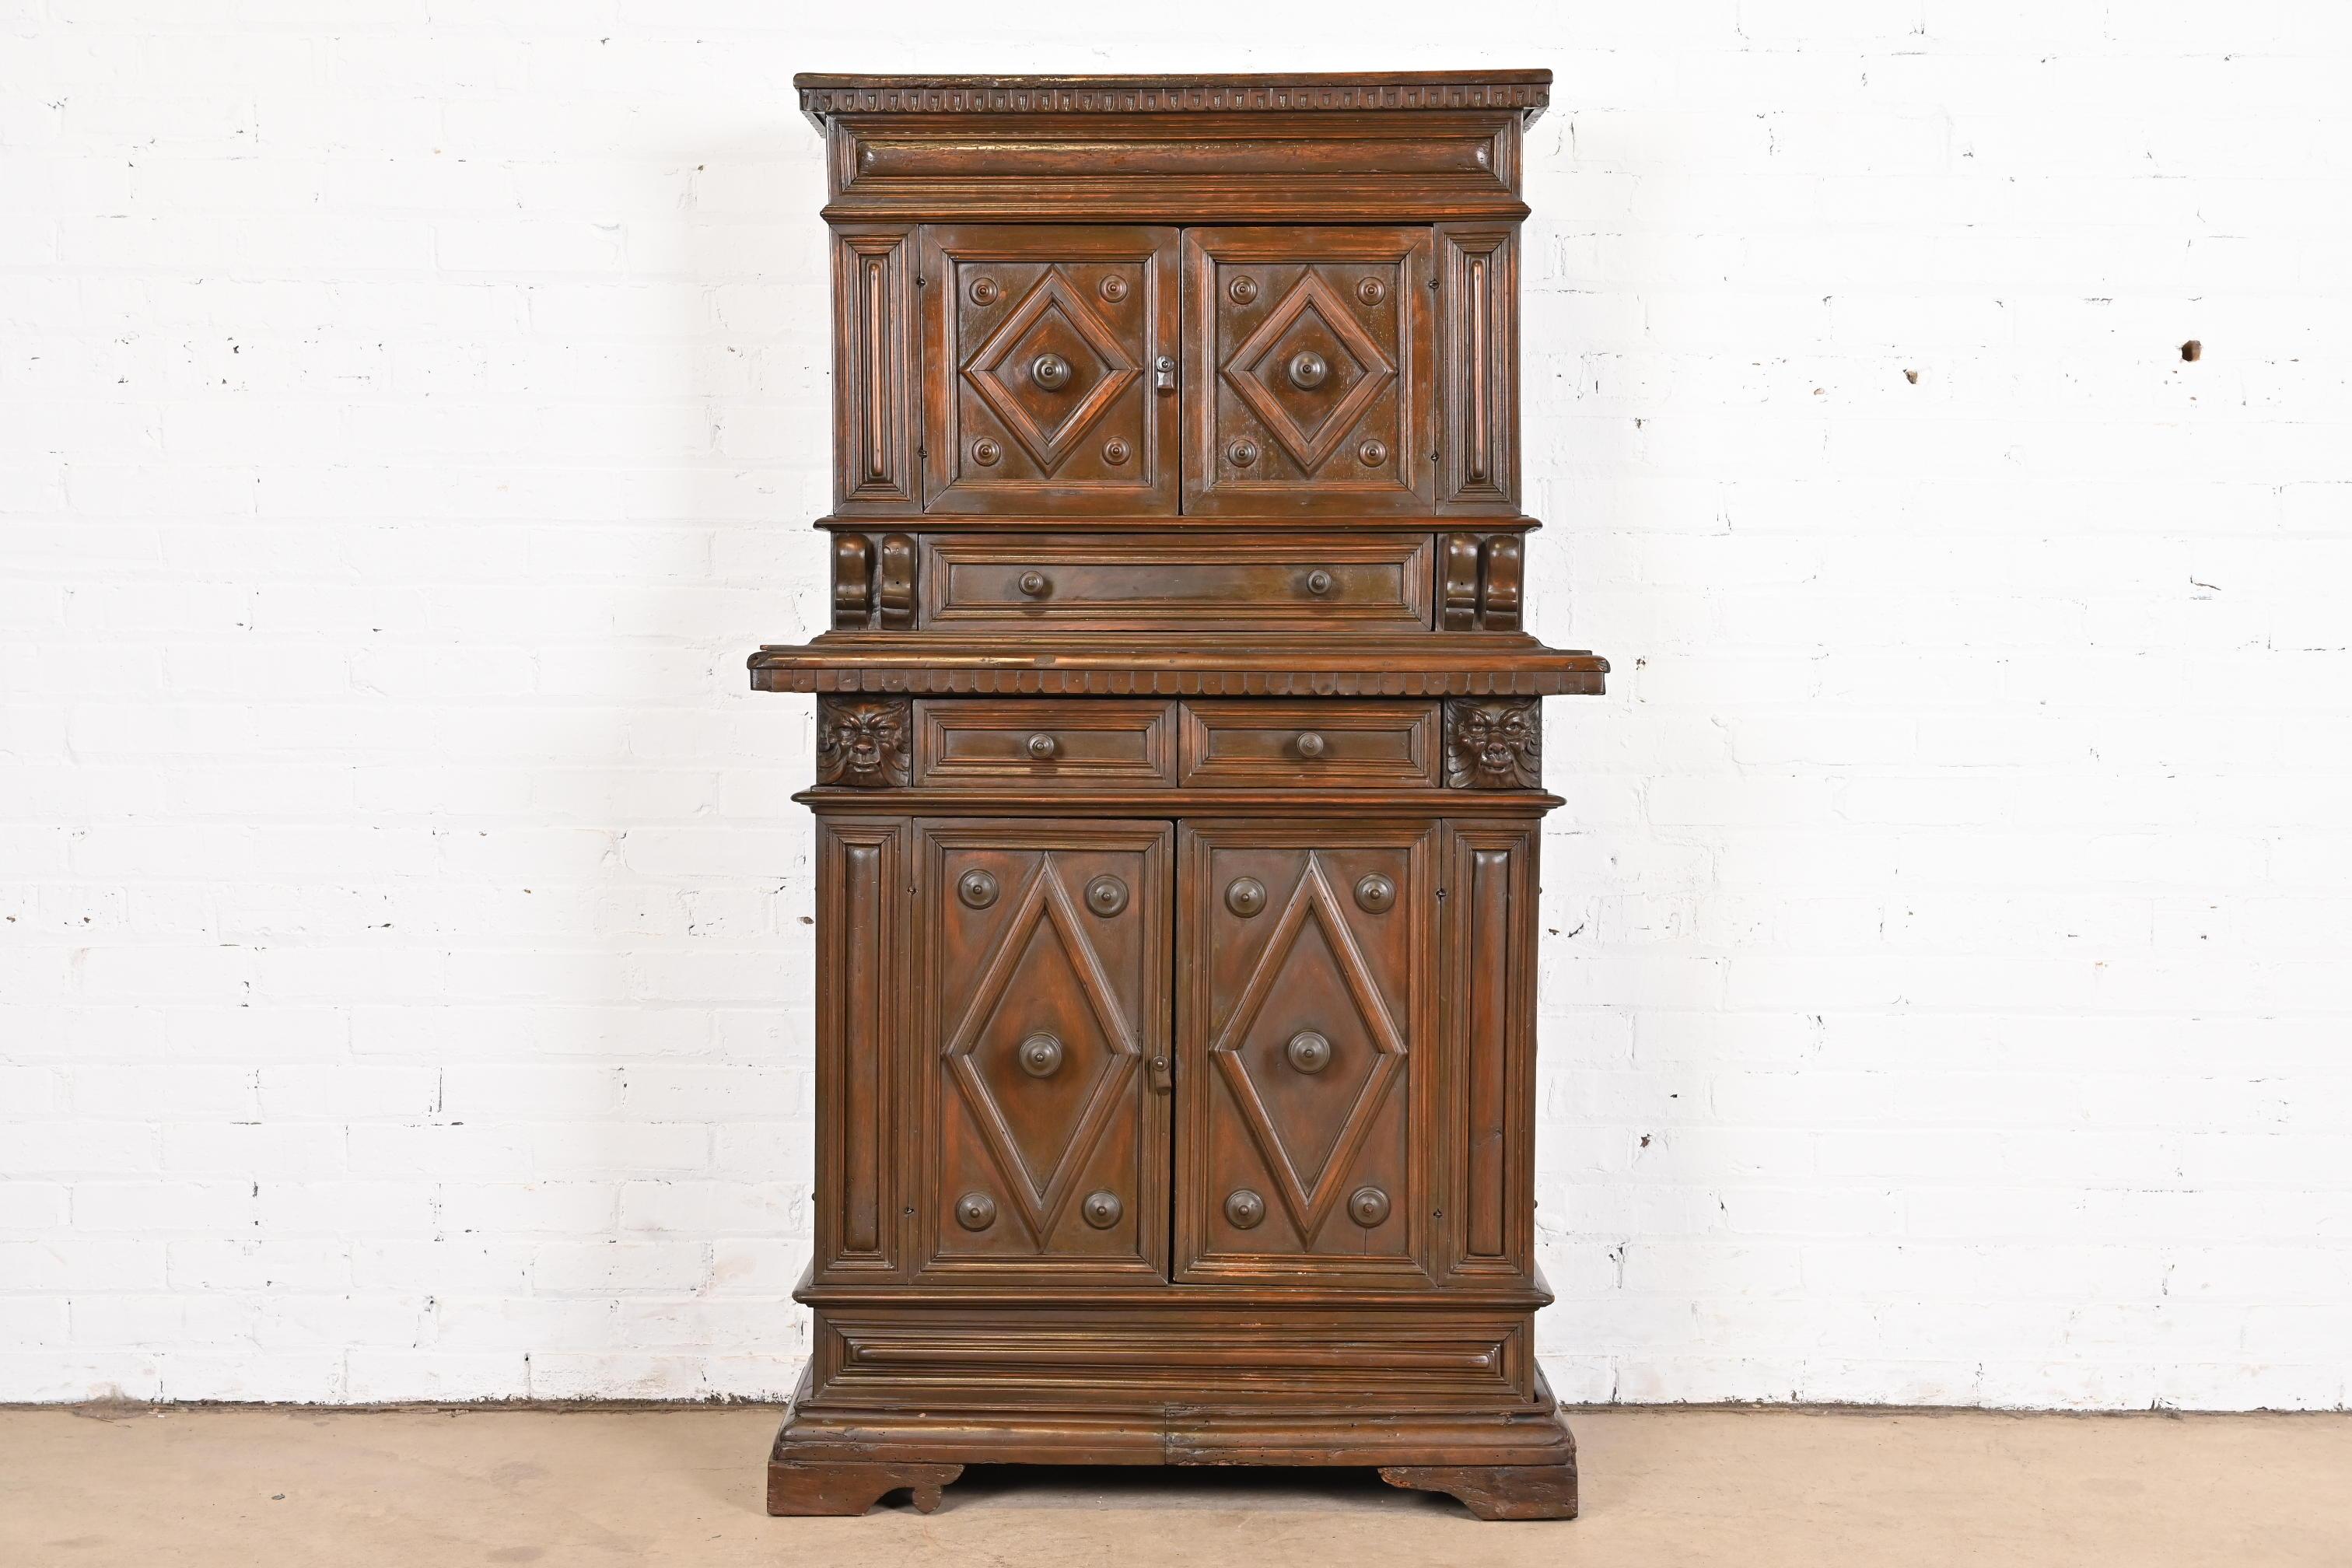 Antique Italian Carved Walnut Renaissance Revival Bar Cabinet, circa 1800 In Fair Condition For Sale In South Bend, IN